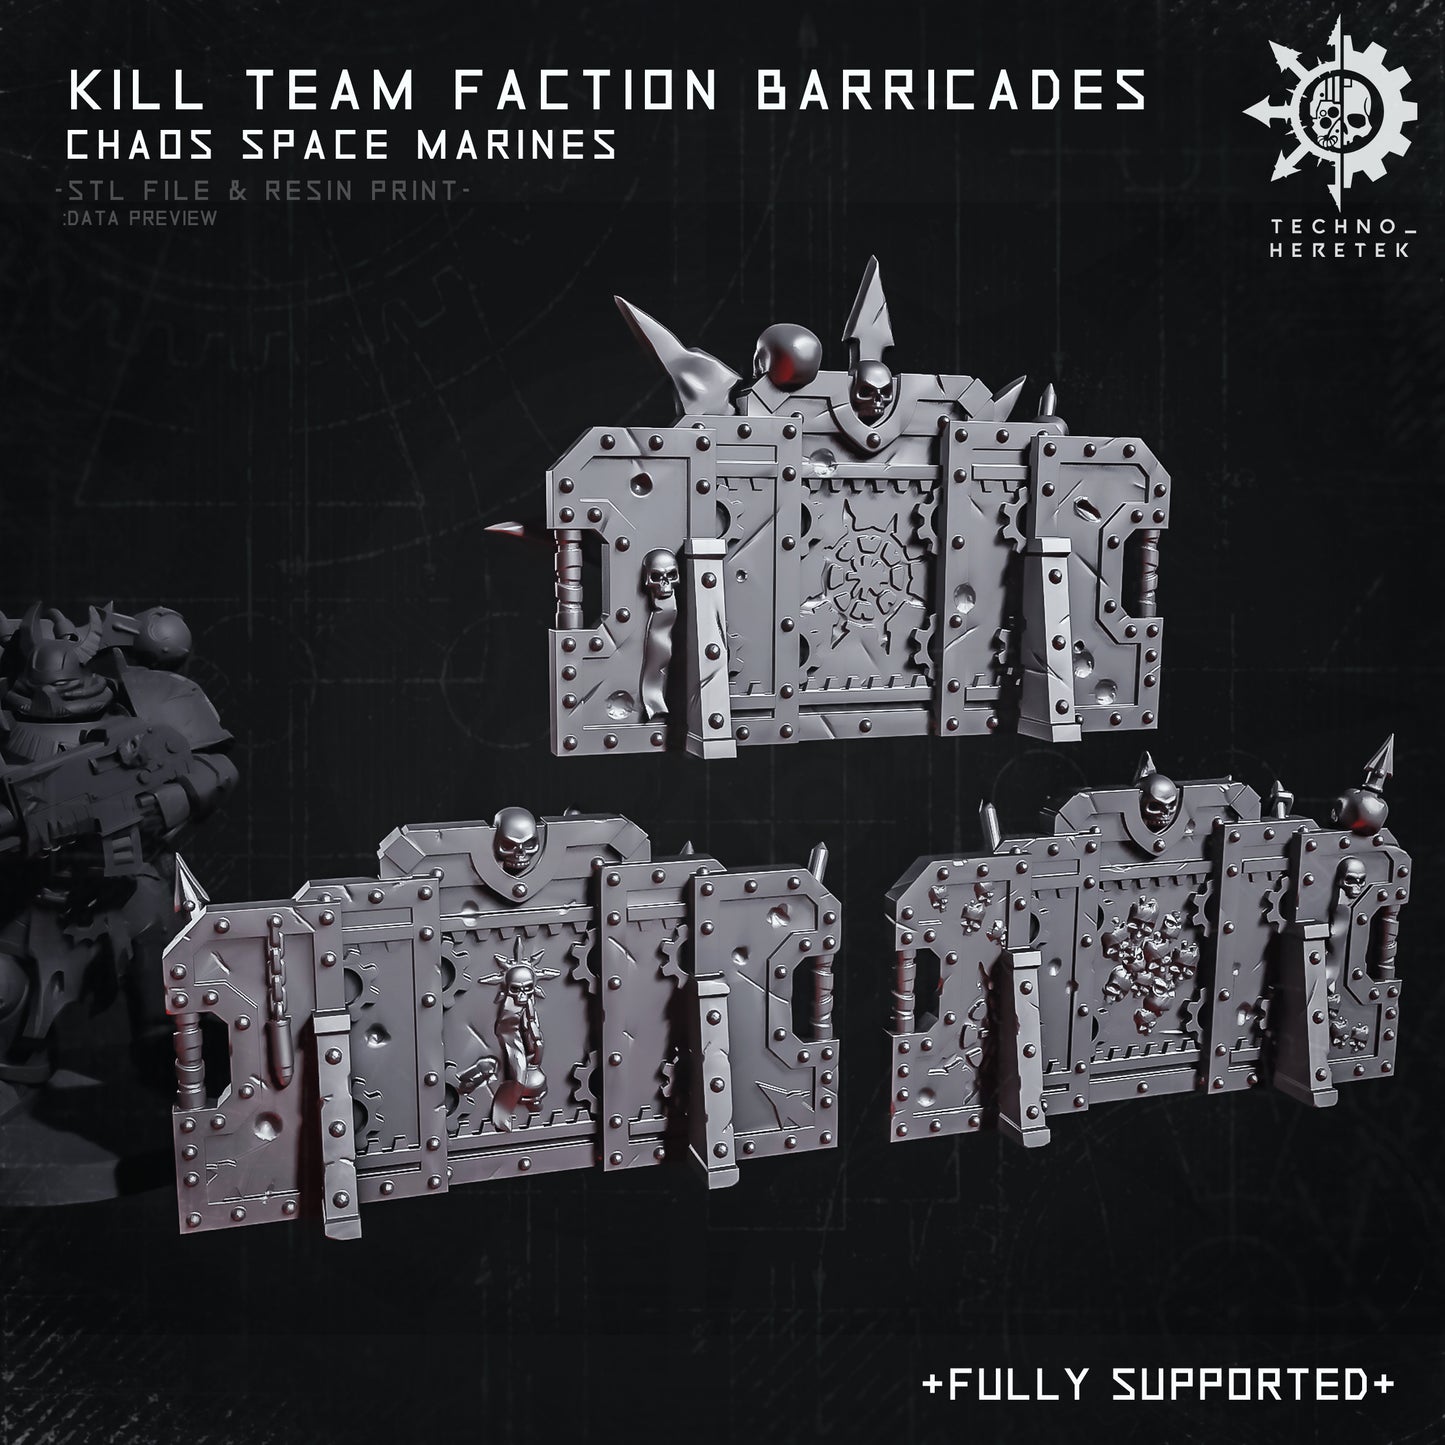 Chaos Space Marines Faction Barricades